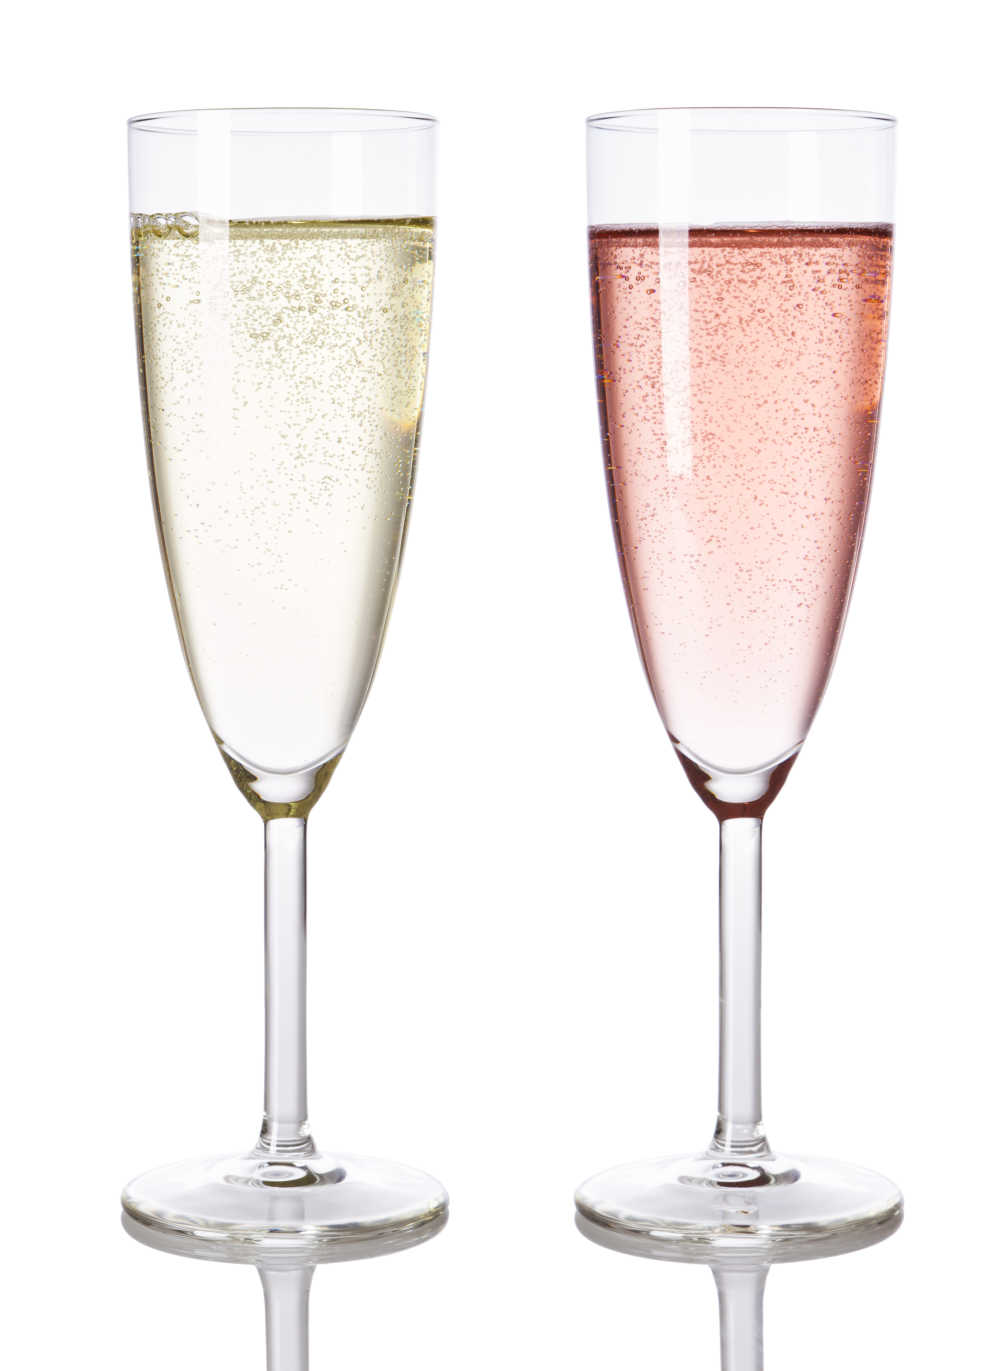 Why Do We Celebrate with Champagne?